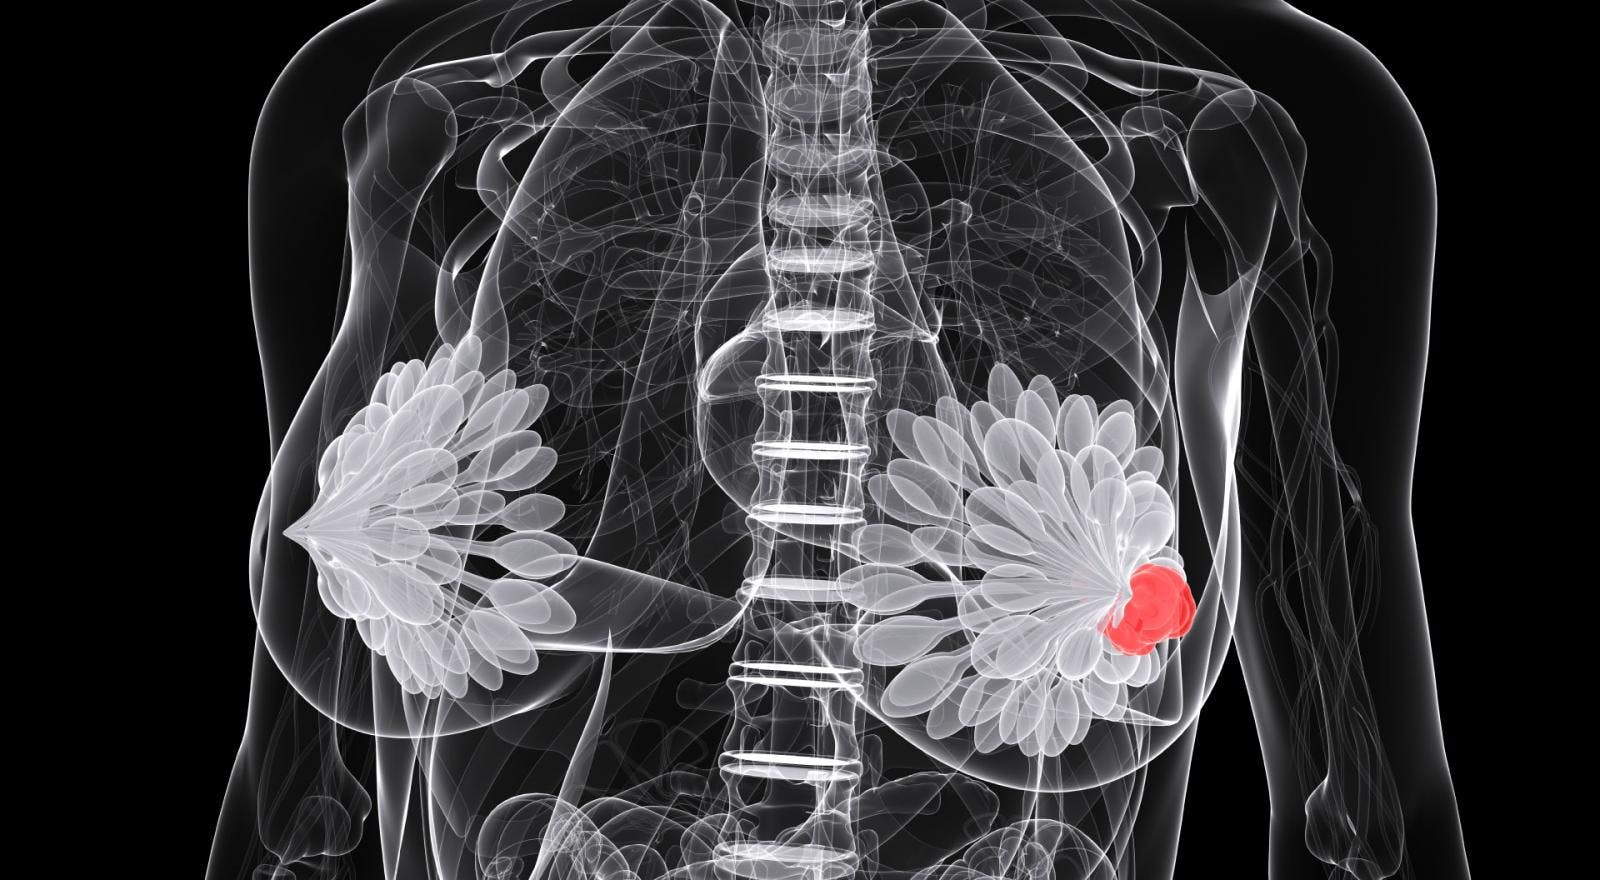 FDA Lifts Hold on Trial Investigating Novel Drug in Patients With High-Risk Breast Cancer